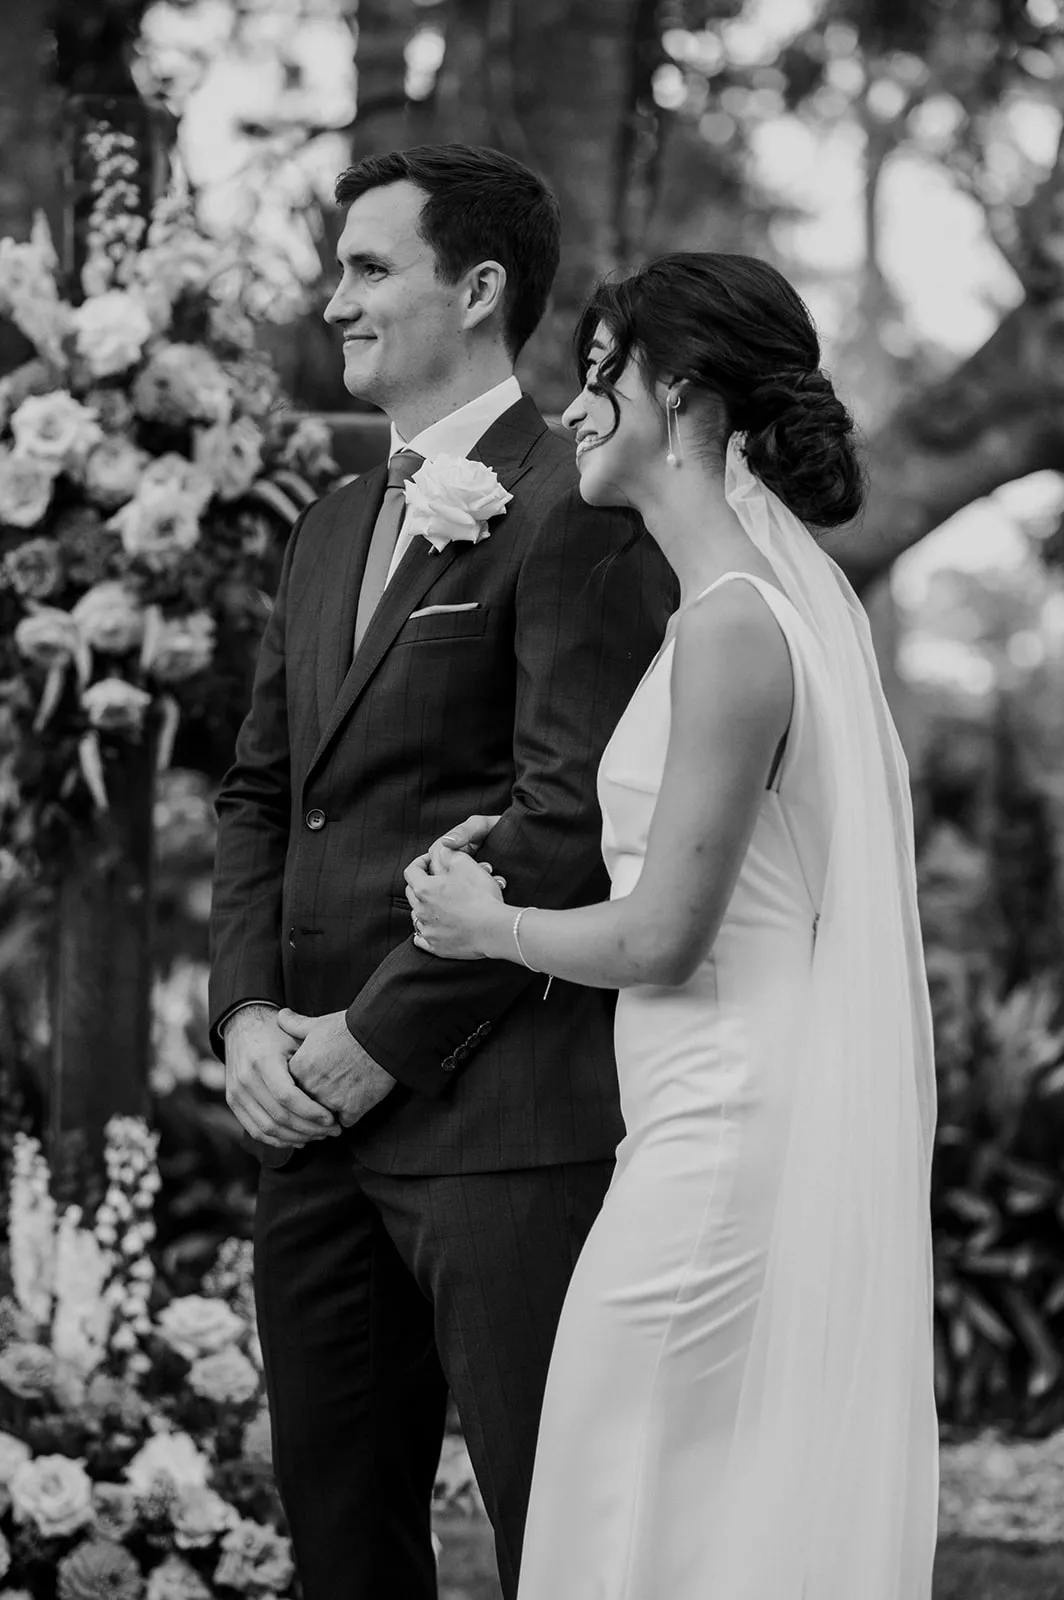 A bride and groom stand together, smiling and looking in the same direction. The bride, in a white gown with a long veil, holds the groom's arm. The groom wears a dark suit with a white rose boutonniere. They are outdoors near a floral arrangement. The photo is in black and white.